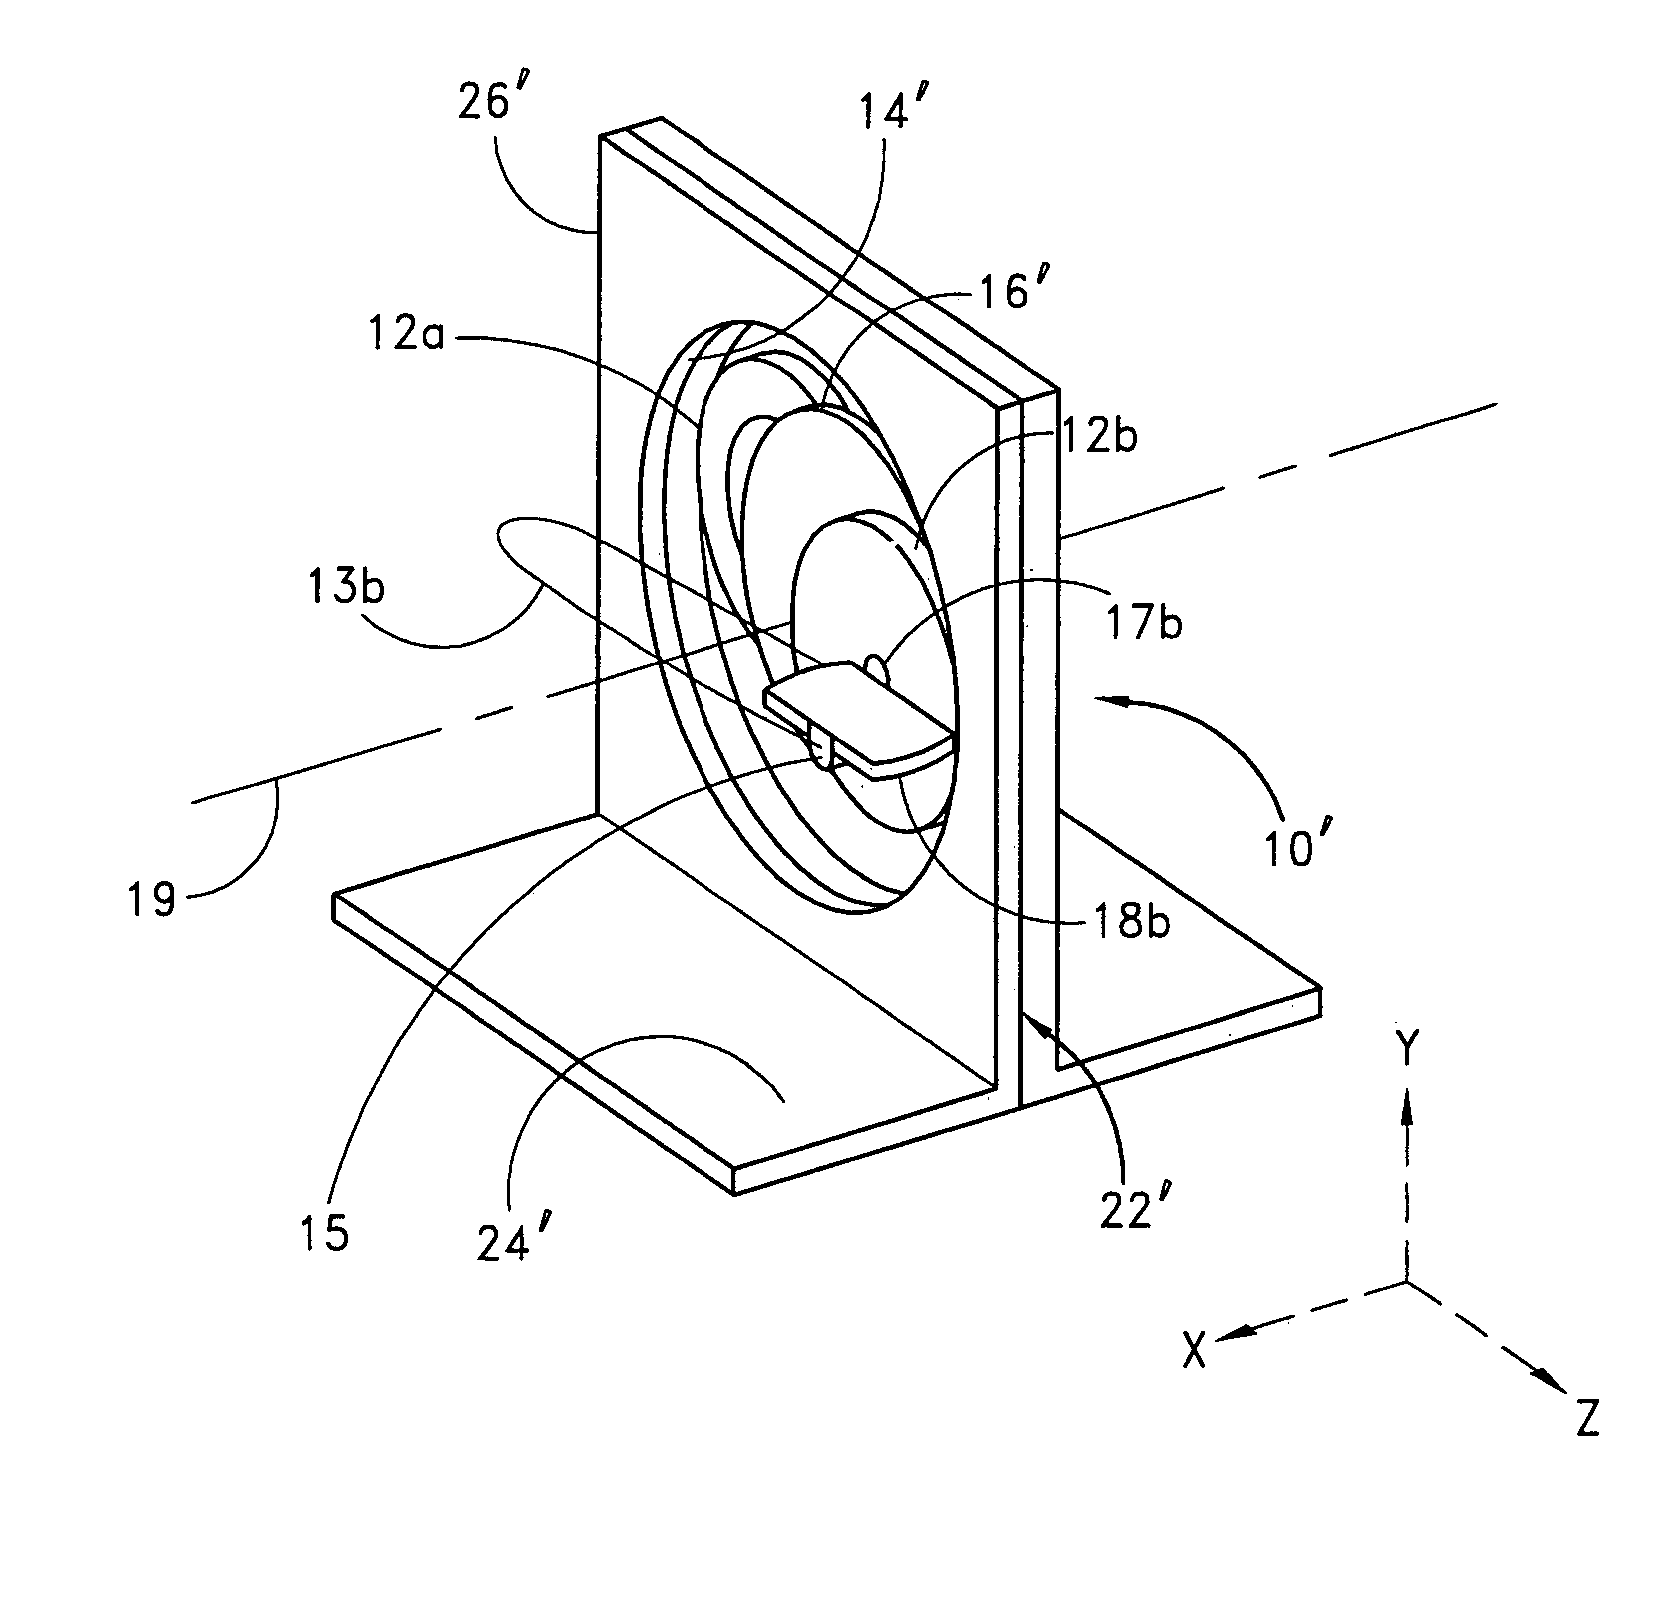 Epicyclic gear exercise device